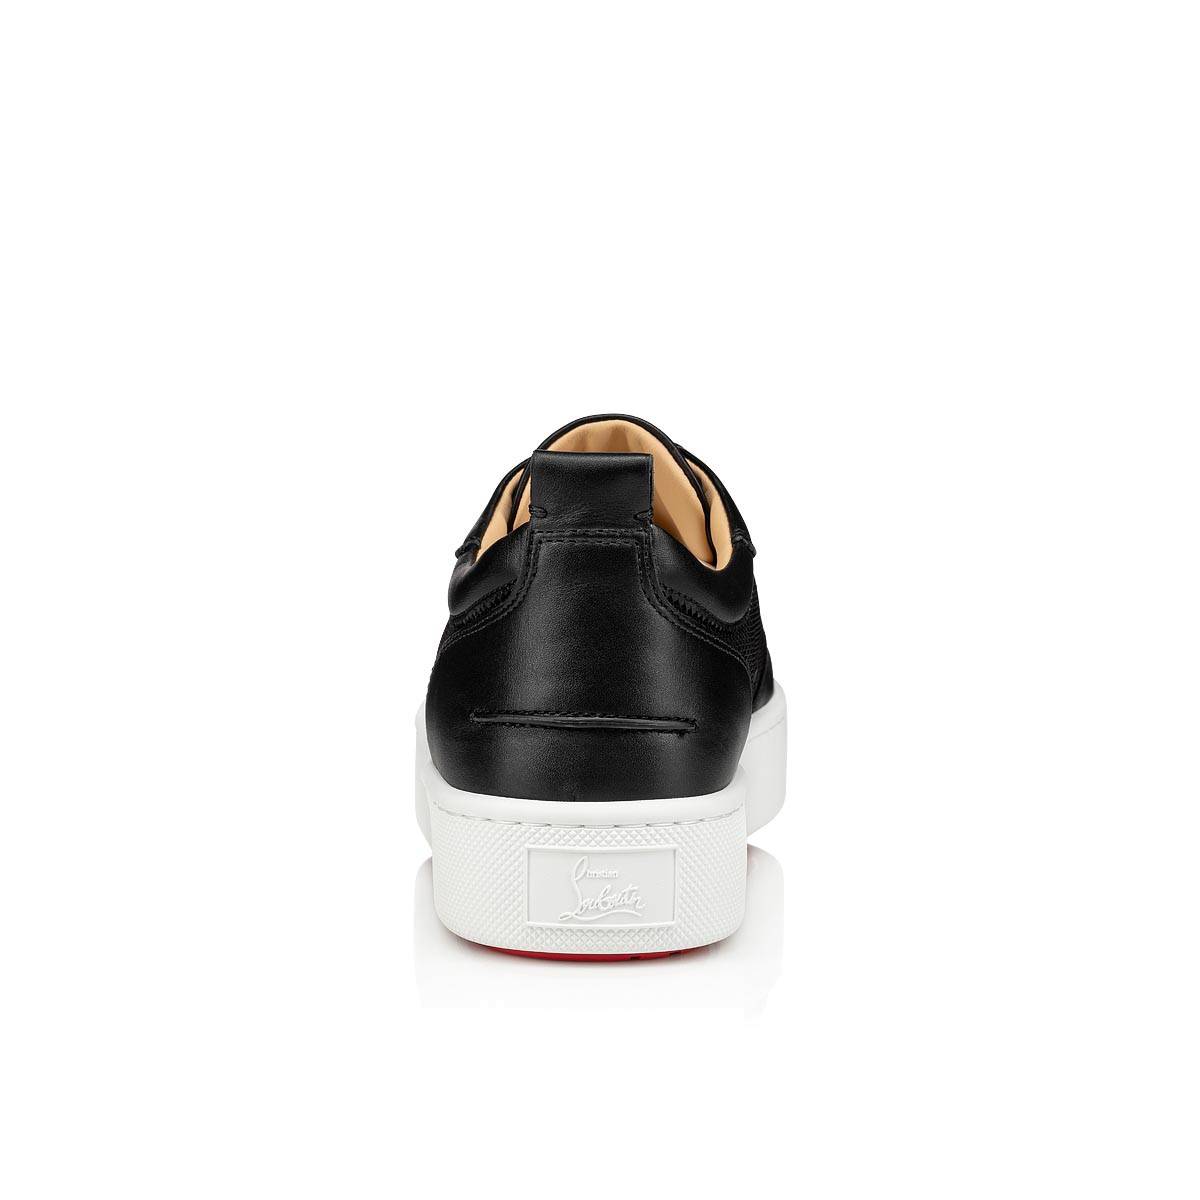 Red Bottoms Low Top Sneakers Online Shop - Christian Louboutin Happyrui